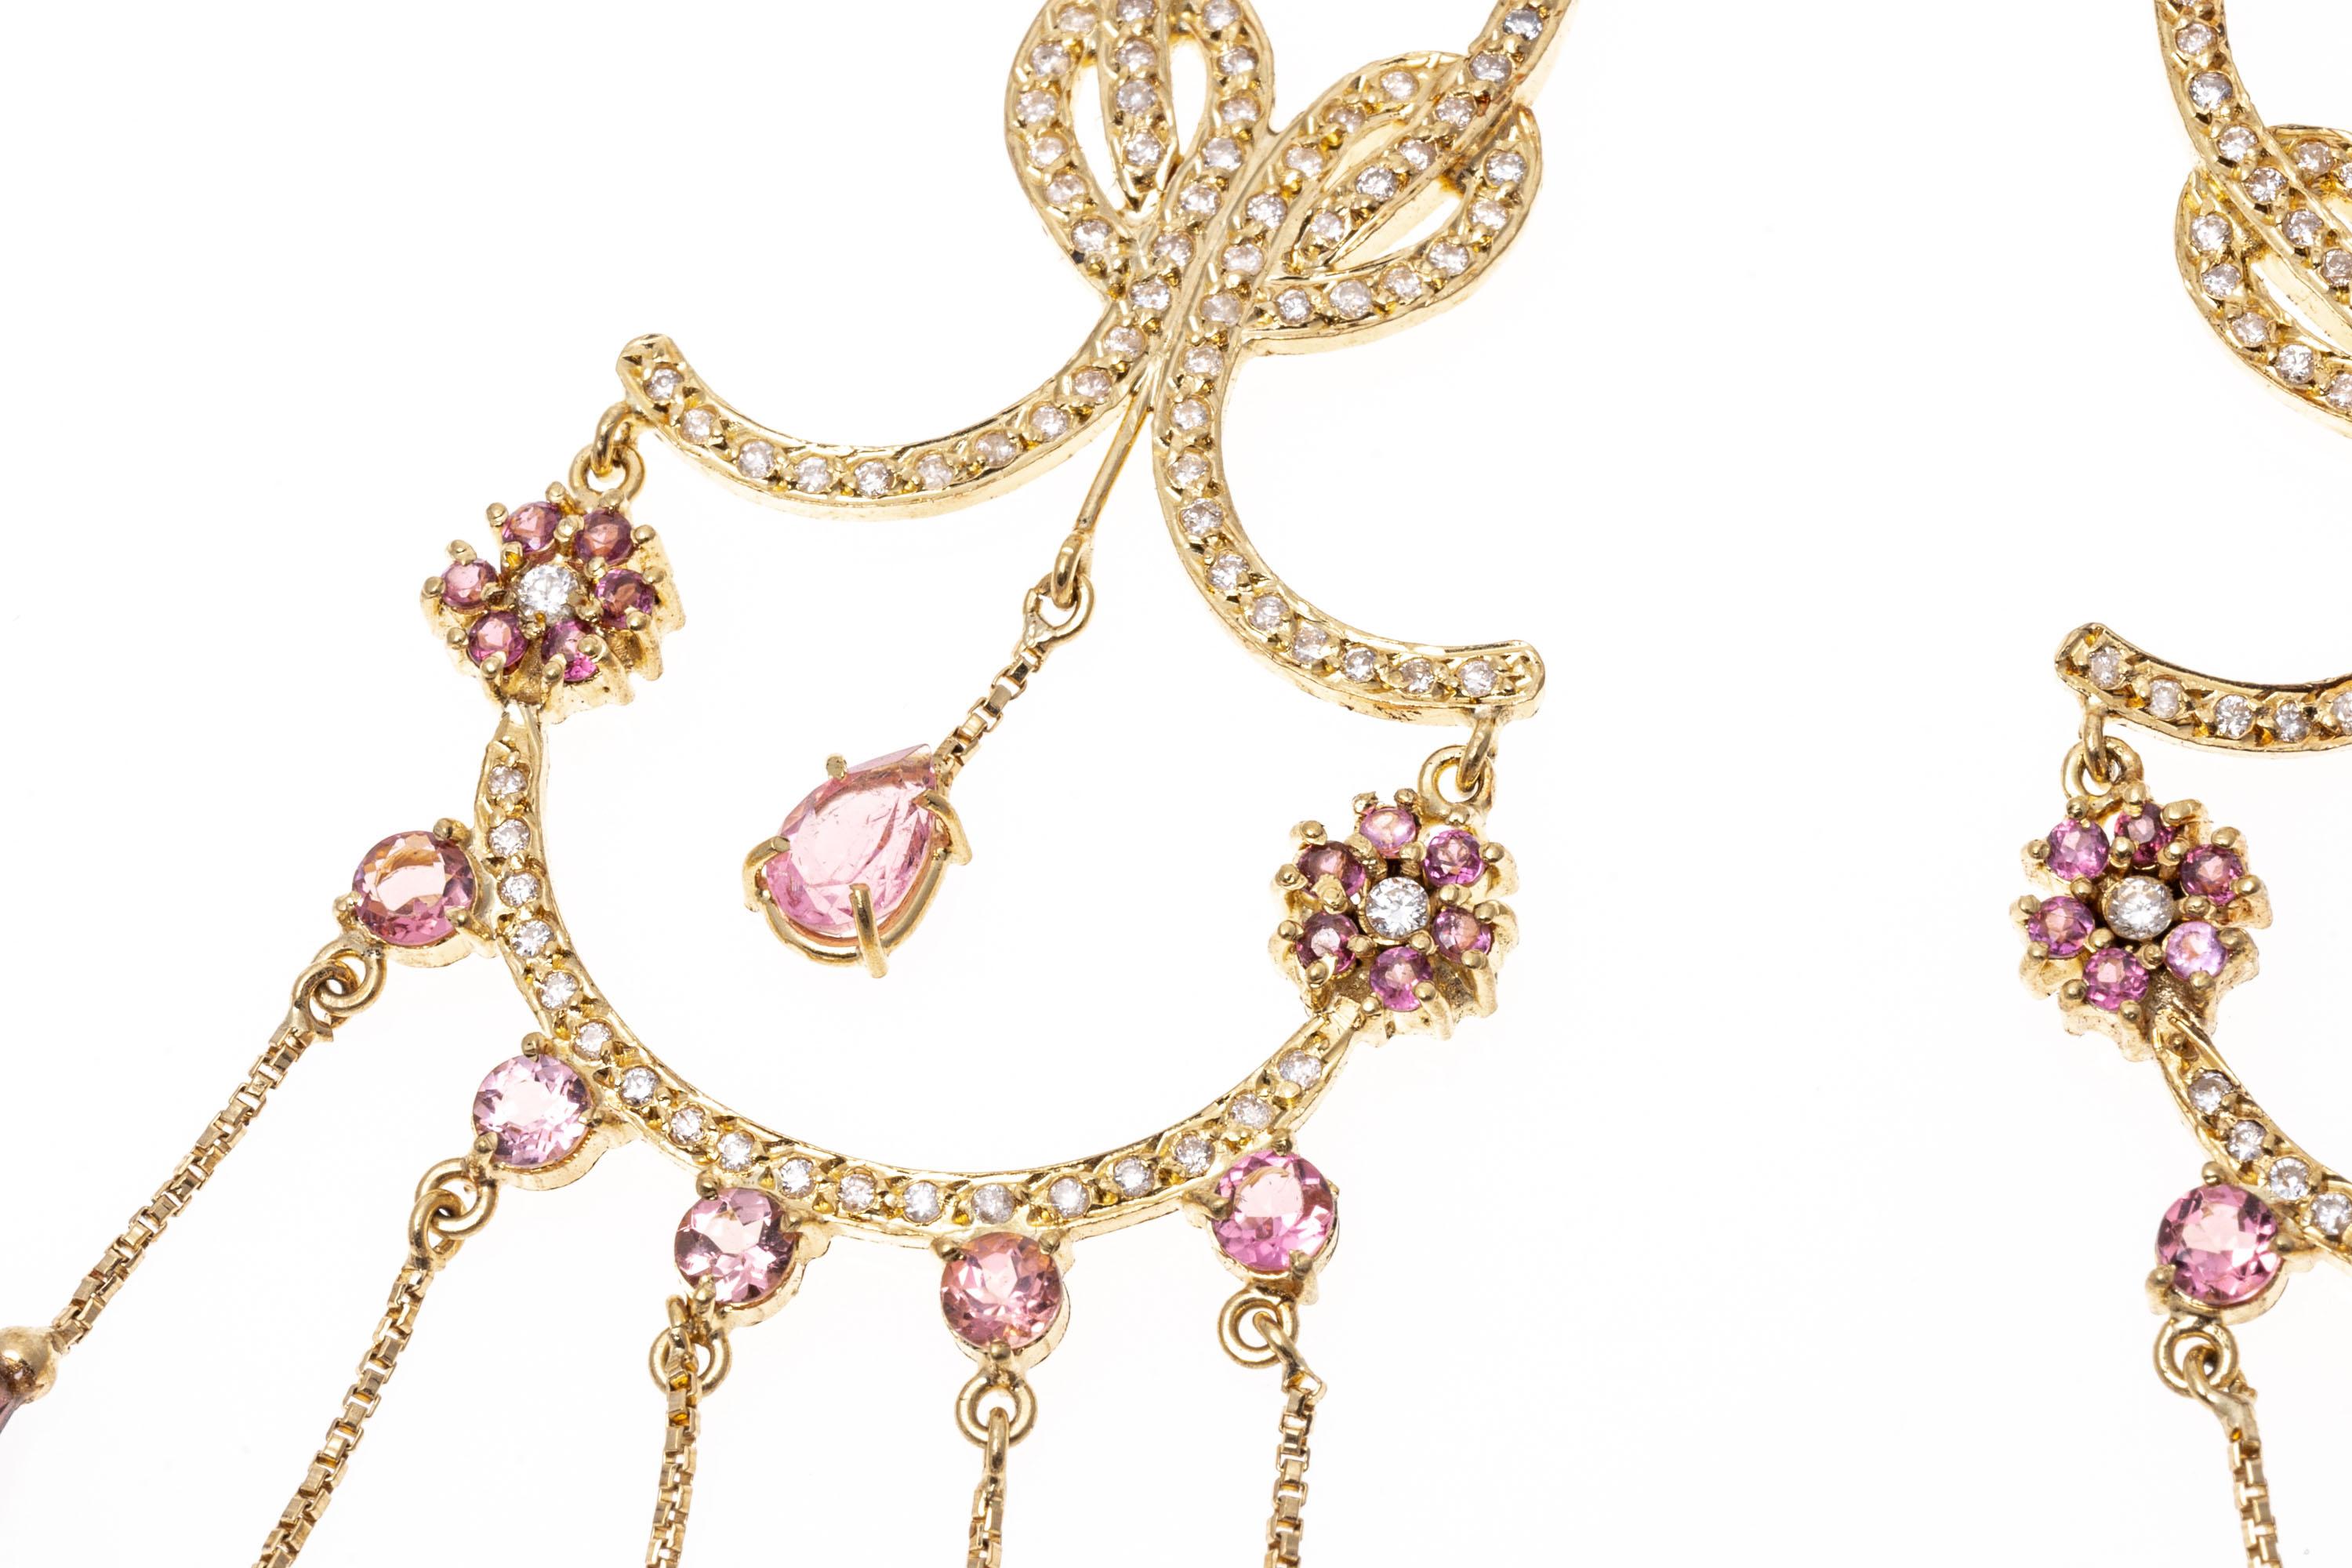 Baroque Revival 14K Gold and Diamond, Garnet and Pink Tourmaline Chandelier Earrings For Sale